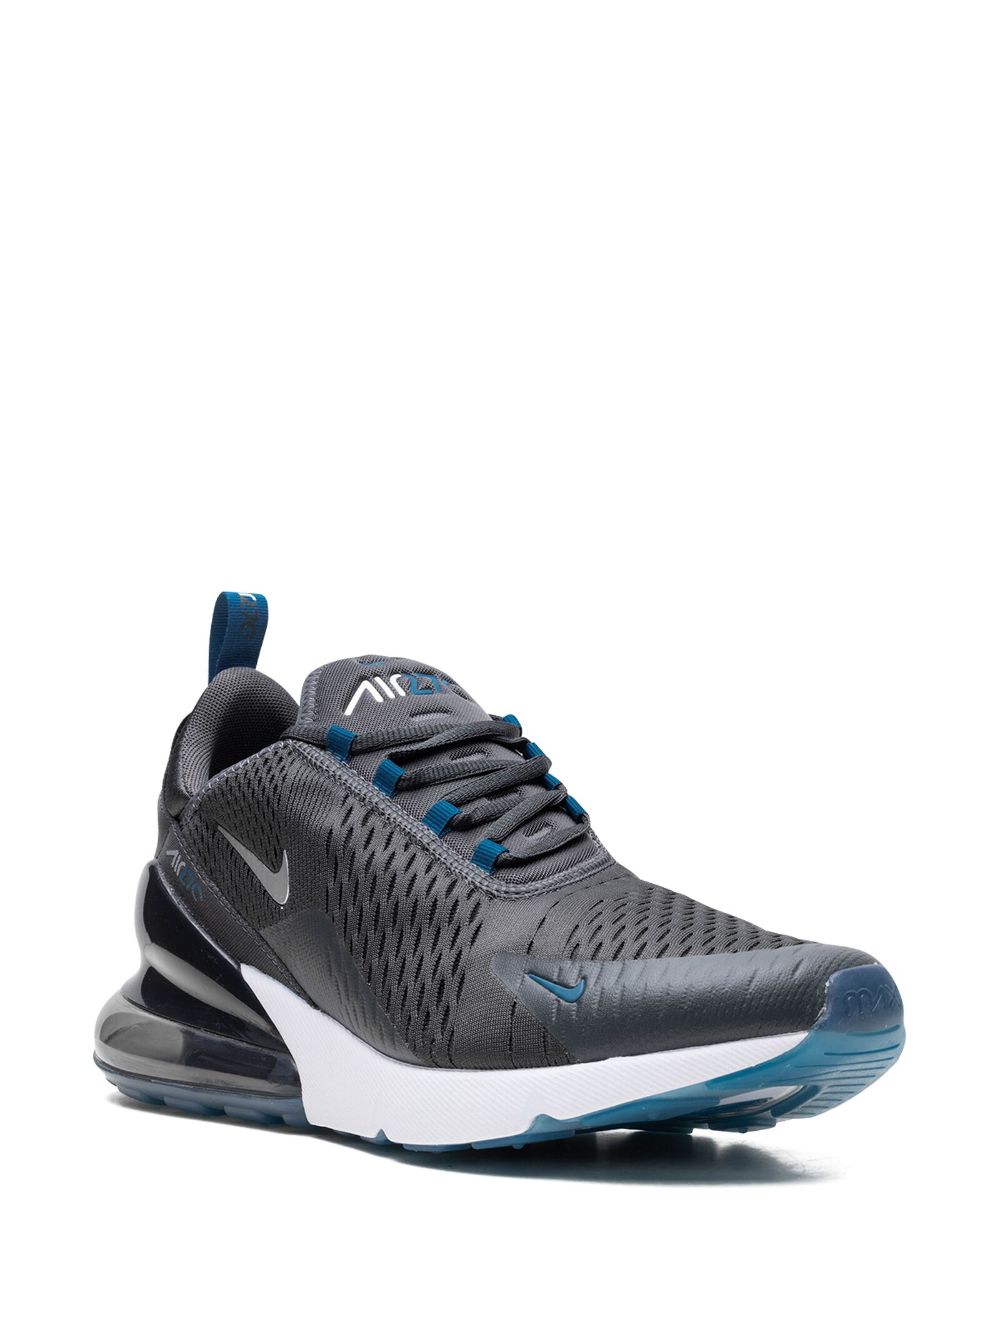 Nike Air Max 270 "Anthracite/Industrial Blue" sneakers - Grijs